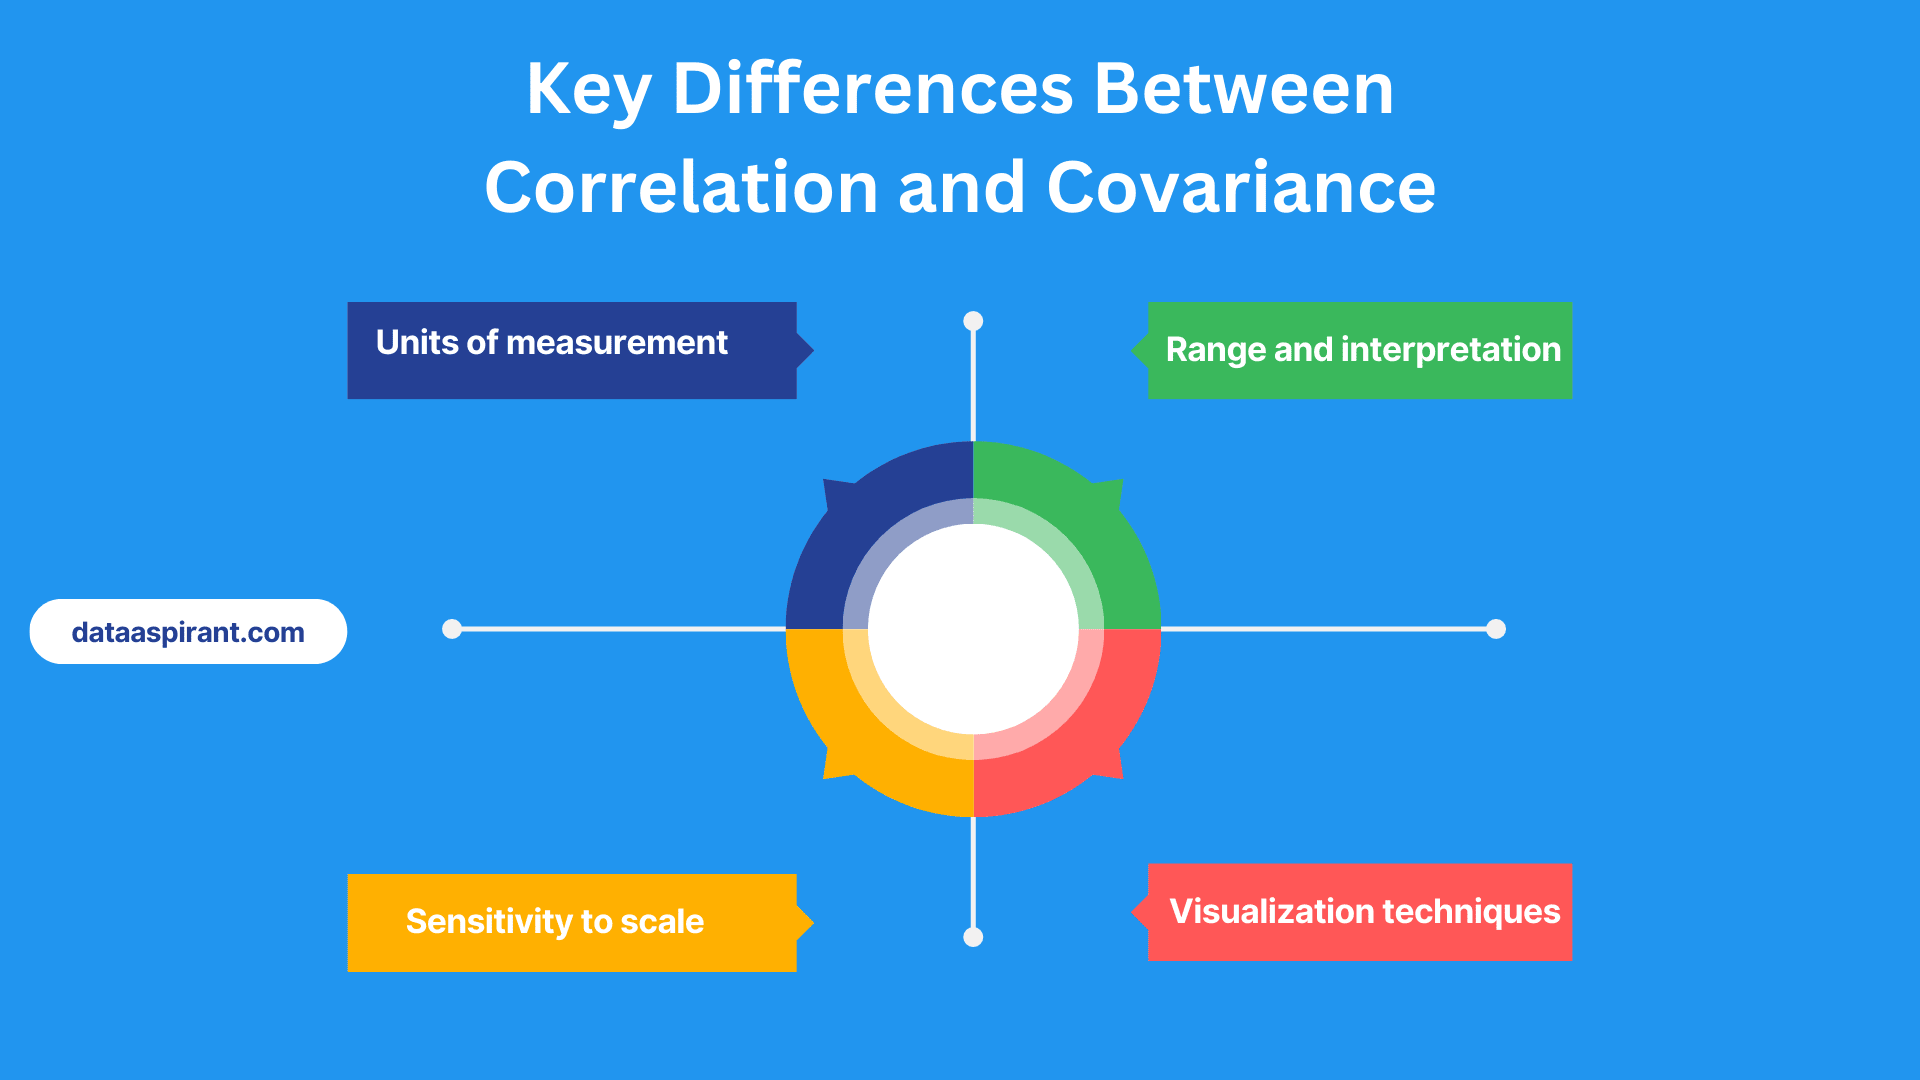 The Key Differences Between Correlation and Covariance